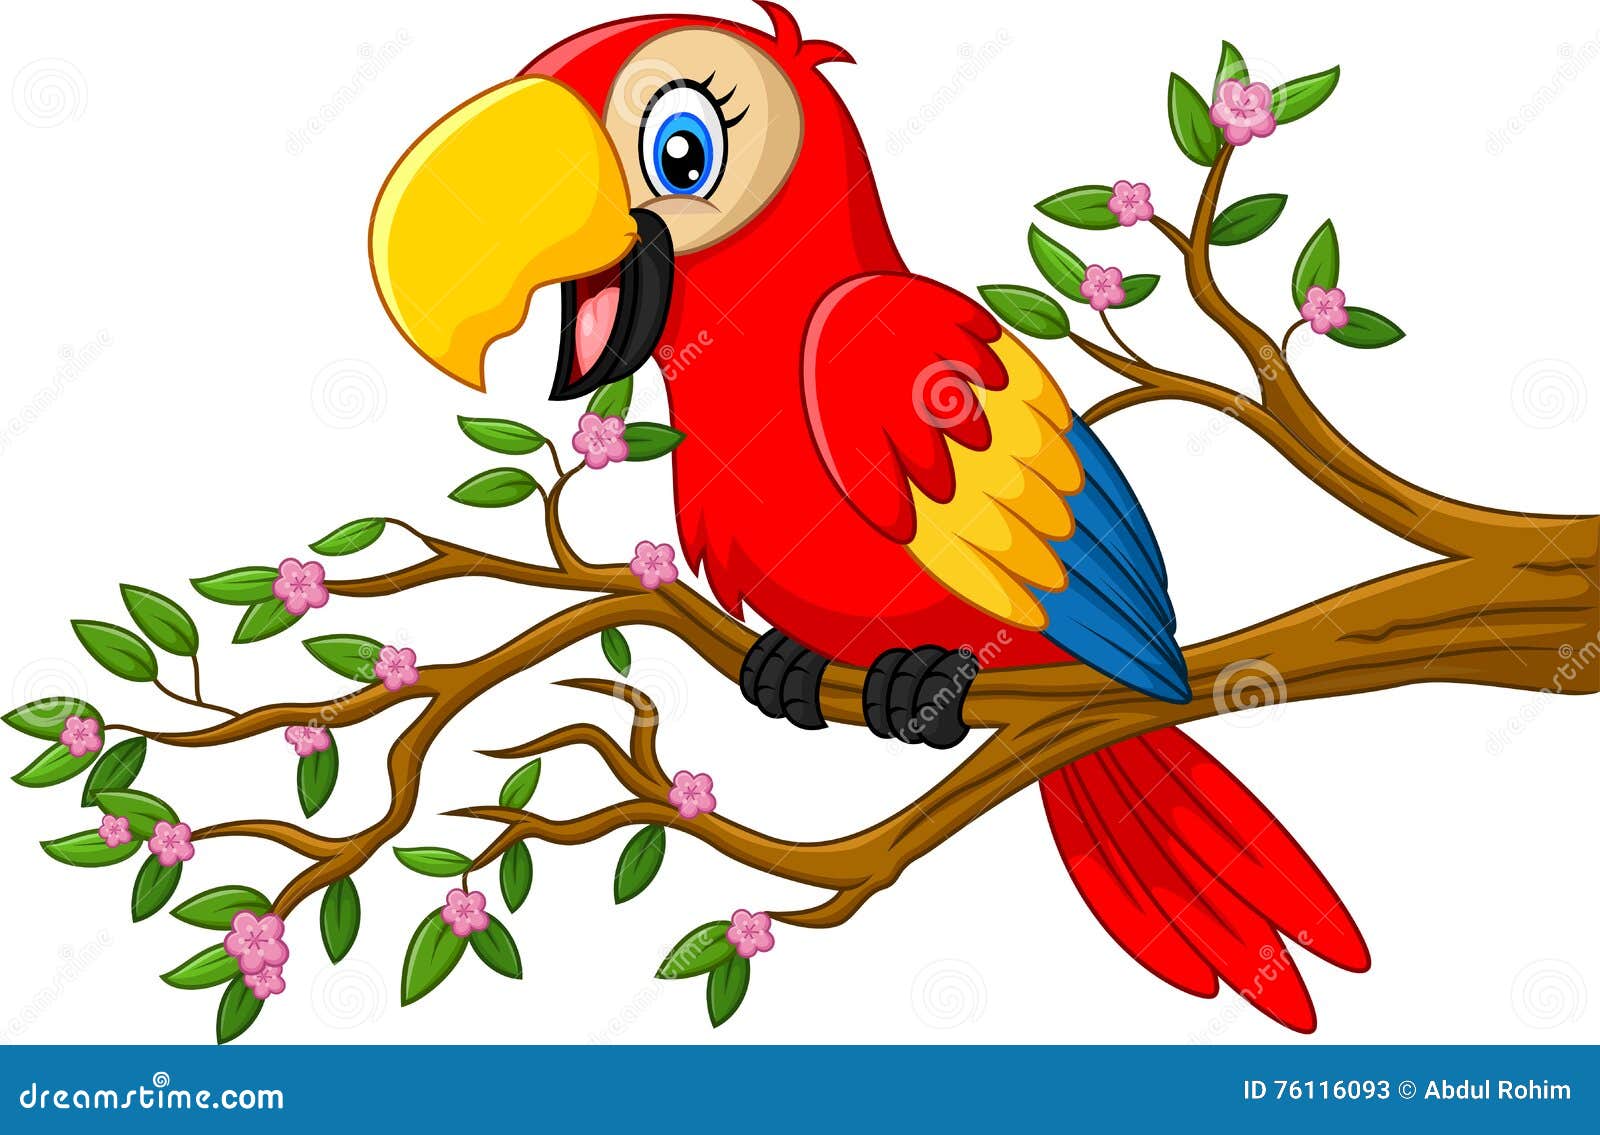 Cute parrot on the branch stock vector. Illustration of character ...